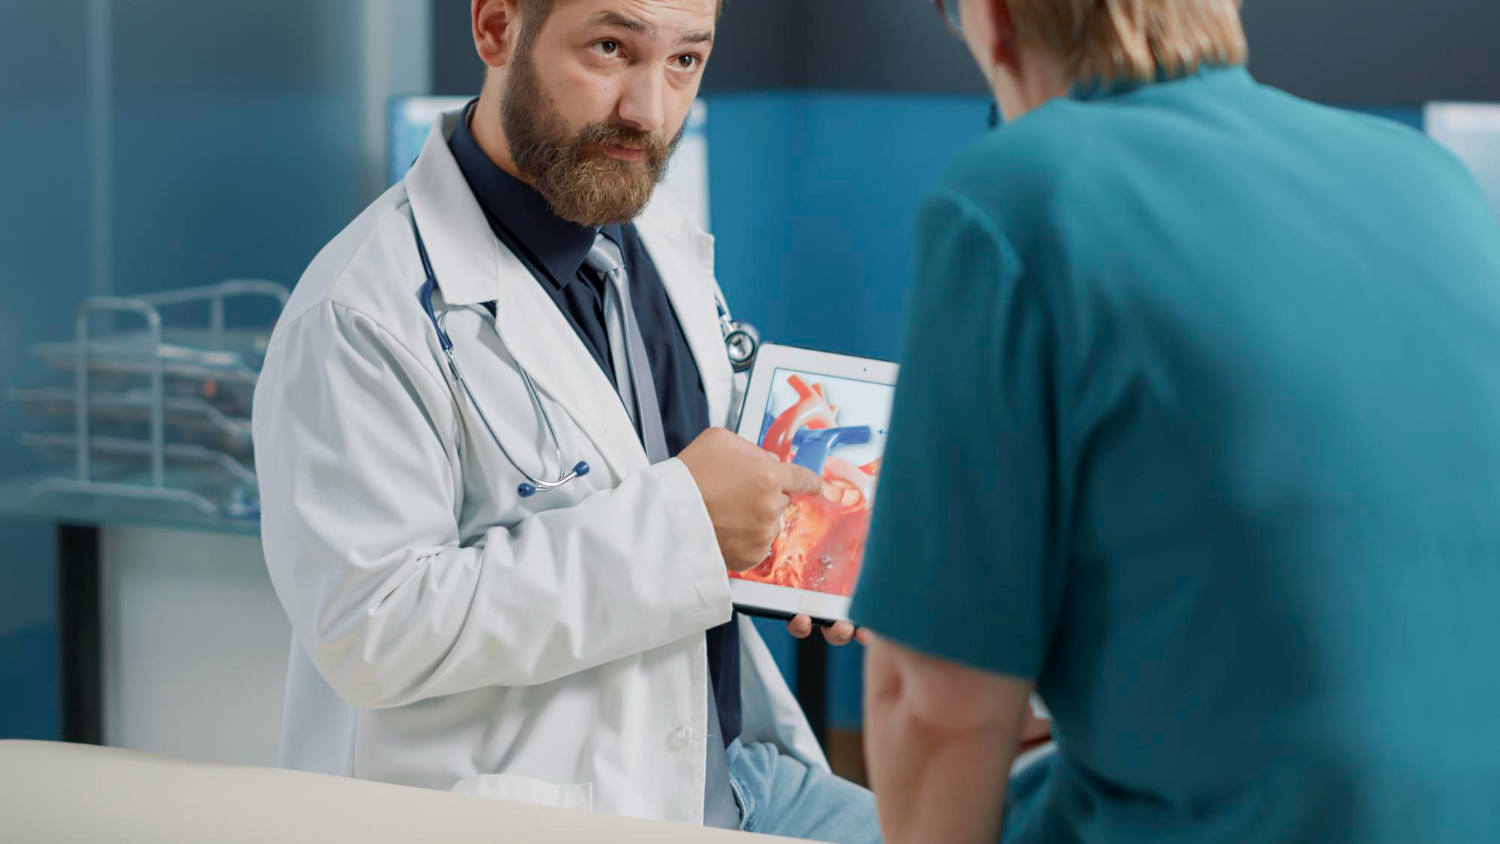 Physician explaining cardiology diagnosis with an image of heart organ on a tablet to patient